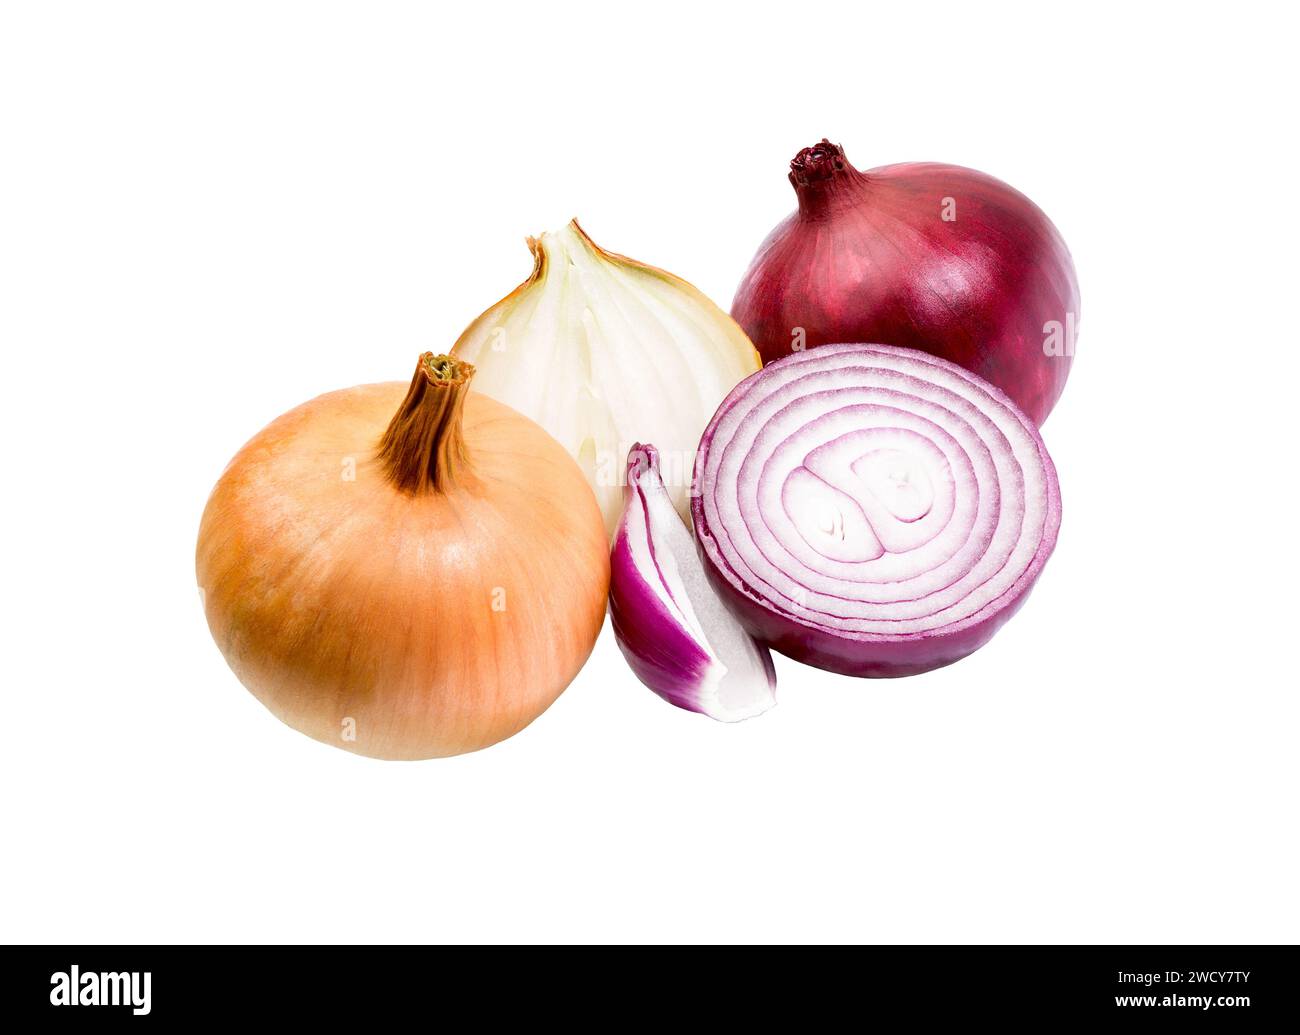 Onion. Whole and sliced onions isolated on white background. Full depth of field. Stock Photo